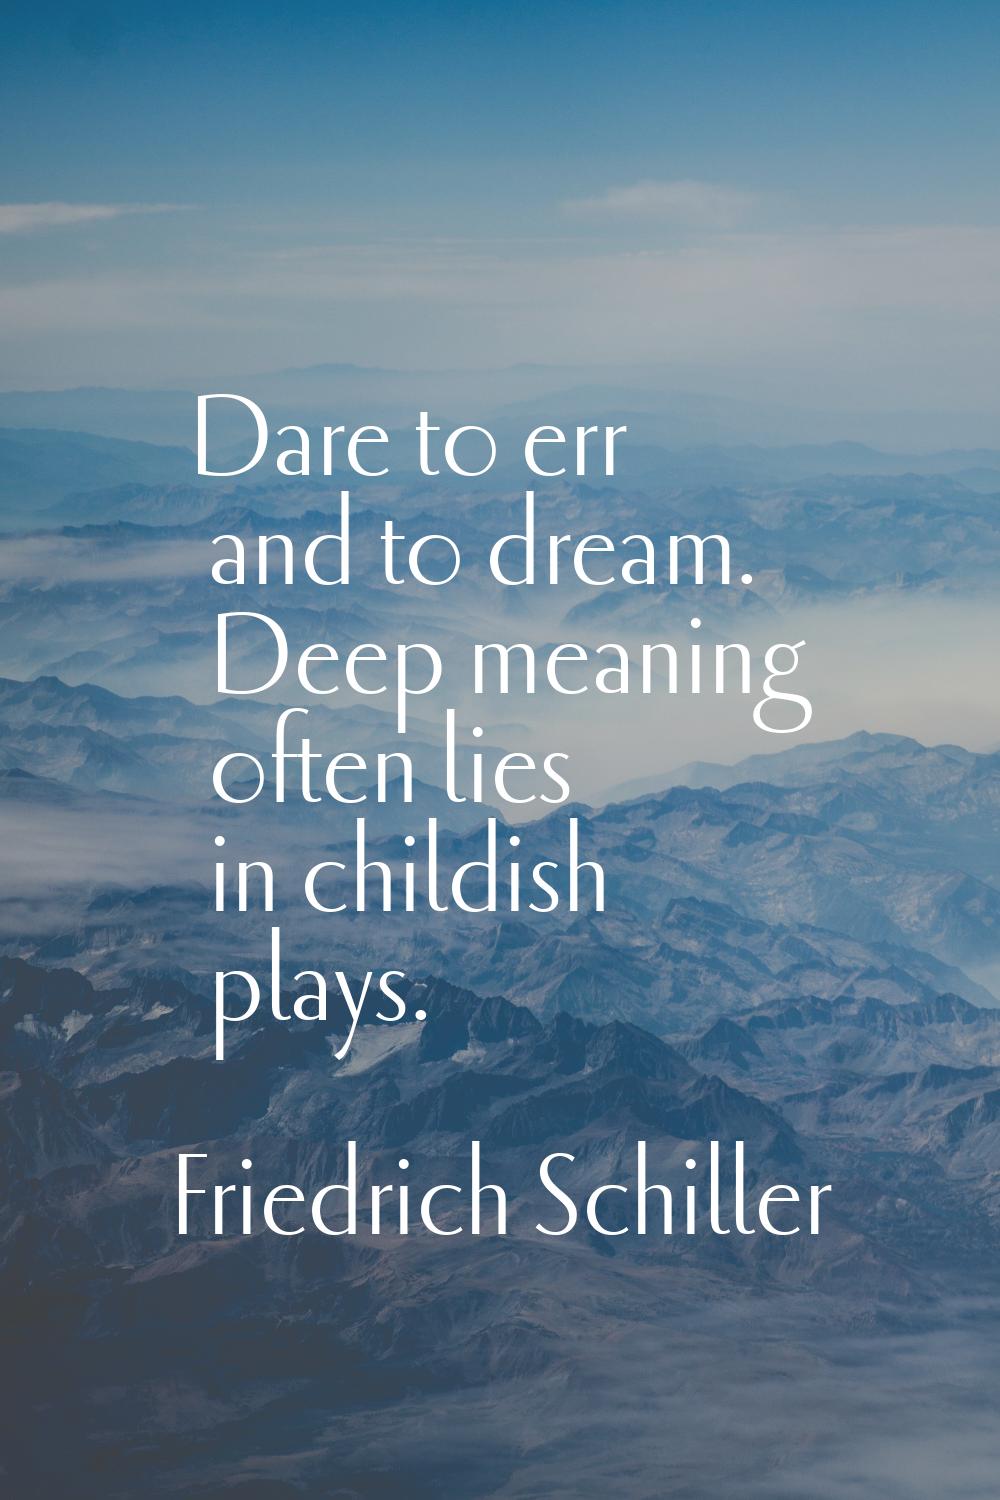 Dare to err and to dream. Deep meaning often lies in childish plays.